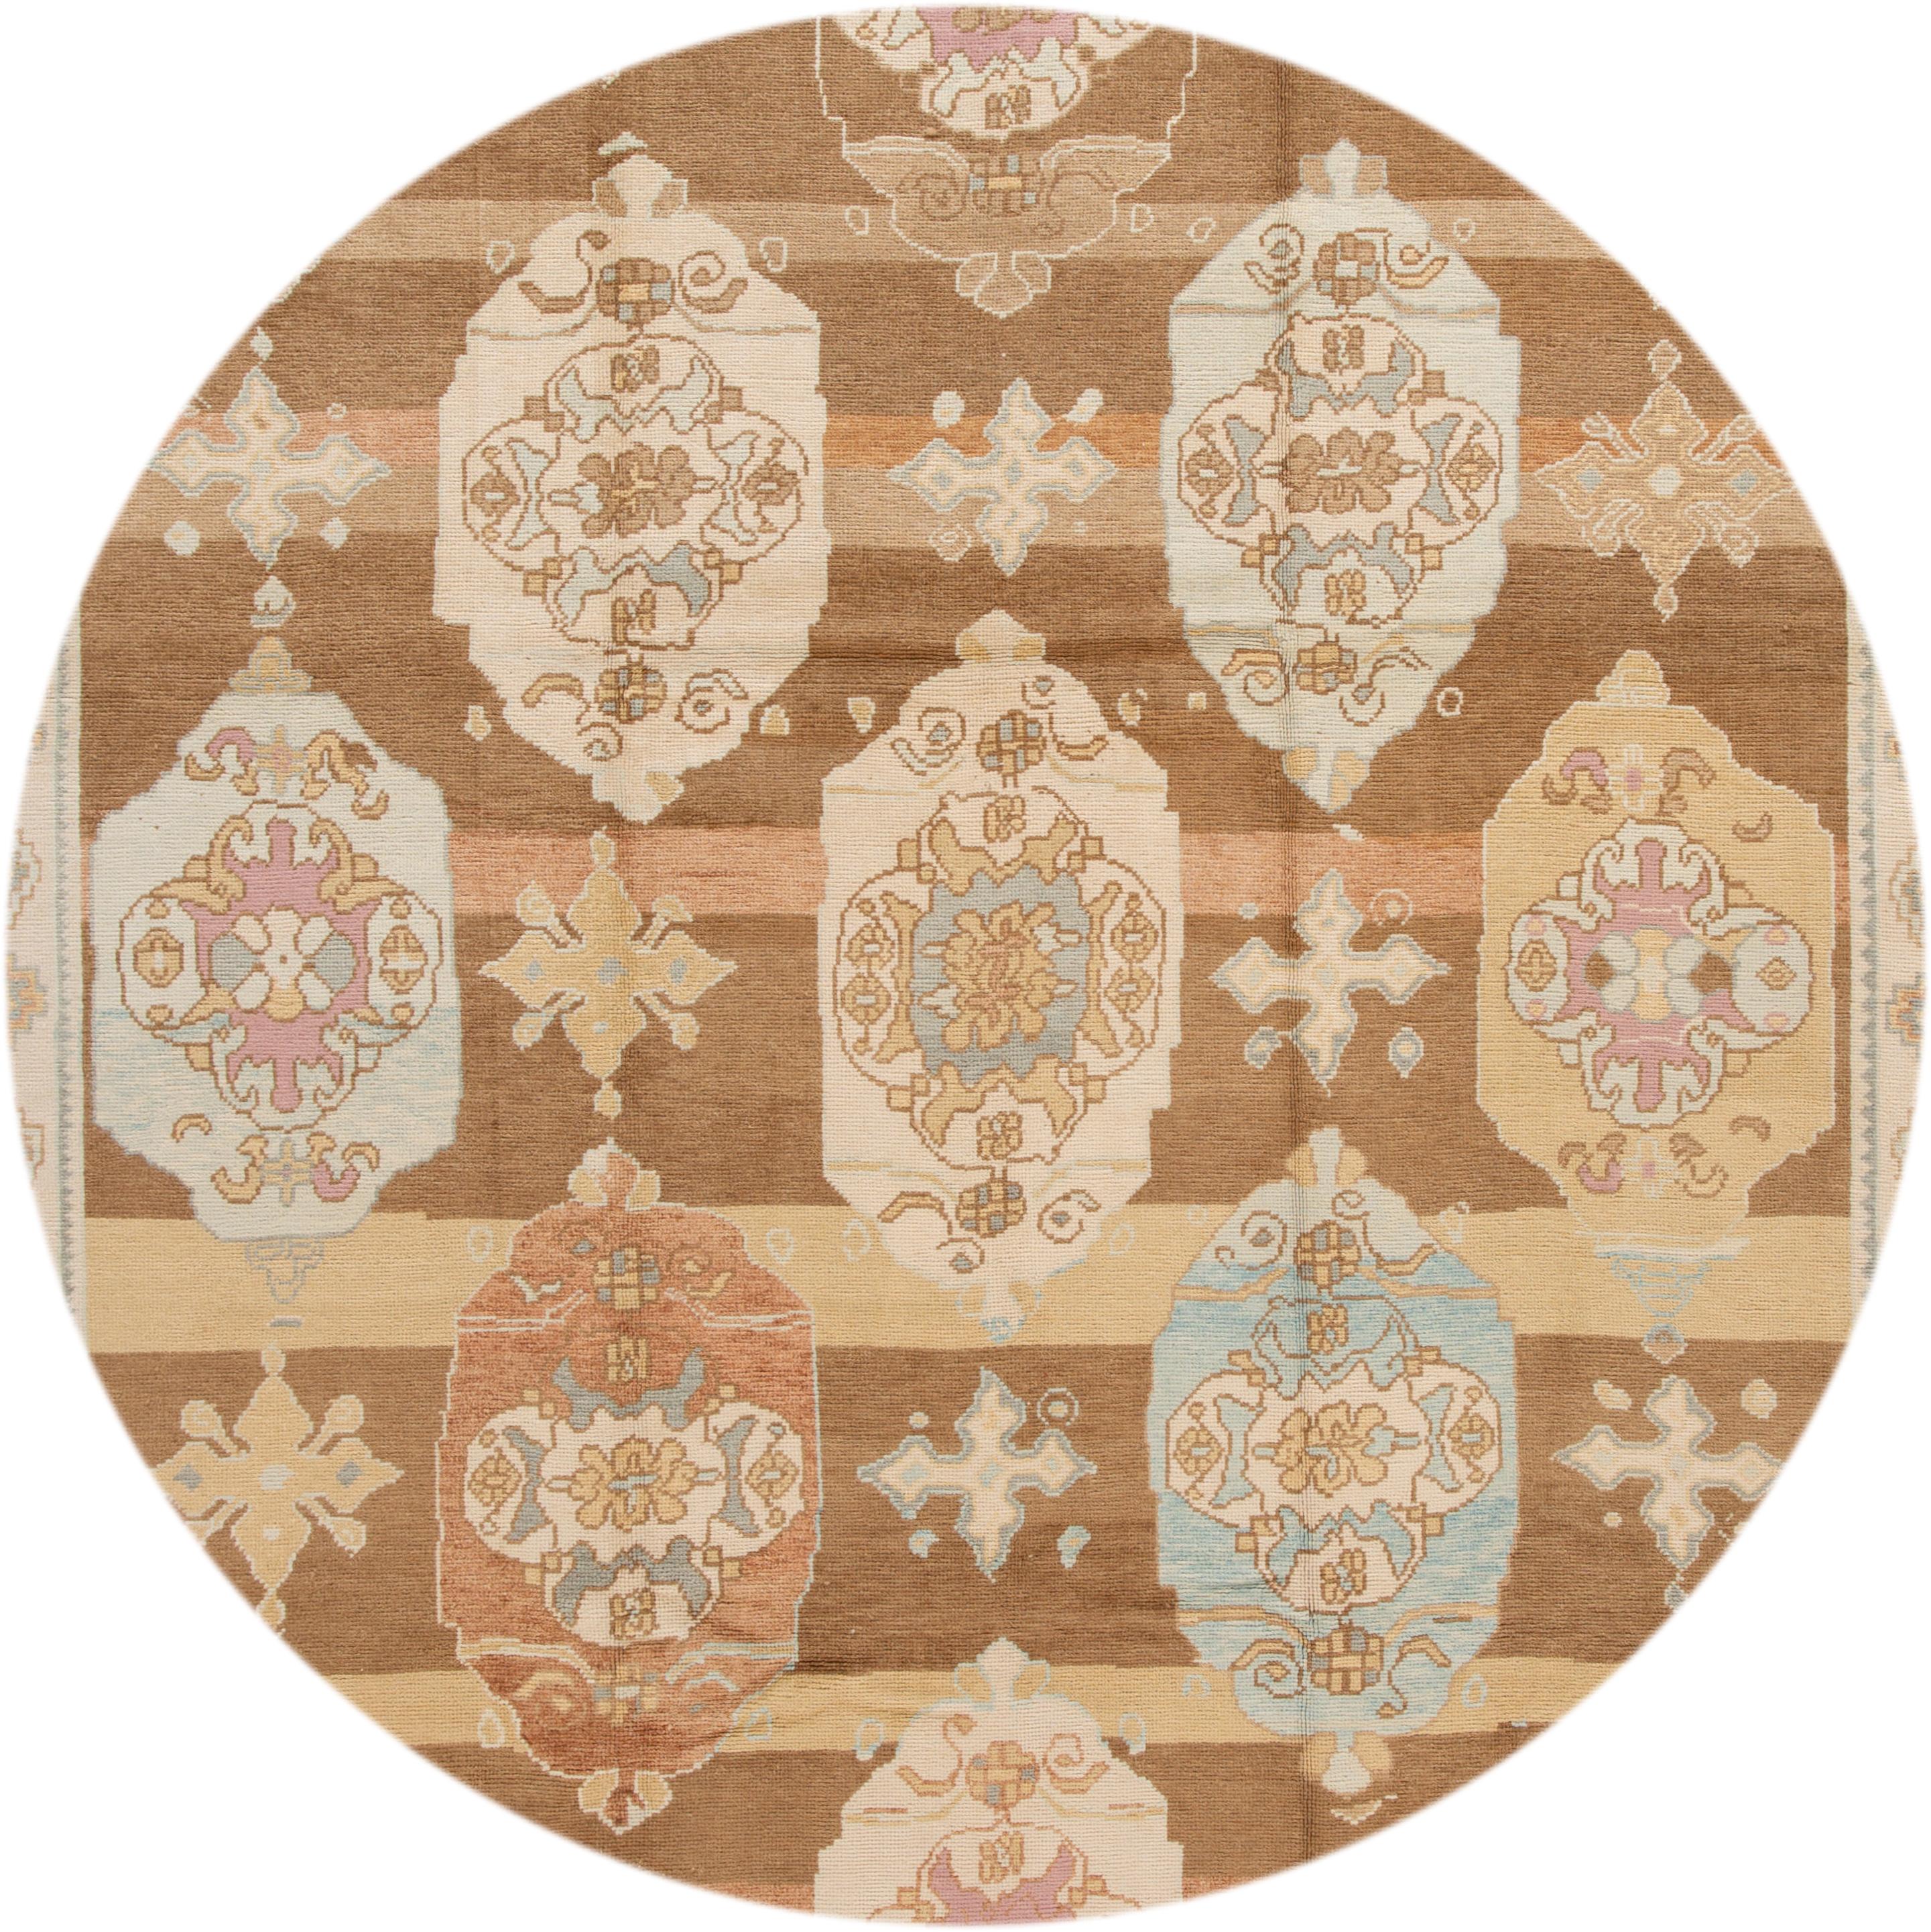 Beautiful contemporary Turkish Kars rug, hand knotted wool with an ivory frame and brown field, multi-color accents in a multi medallion design.
This rug measures: 10'4